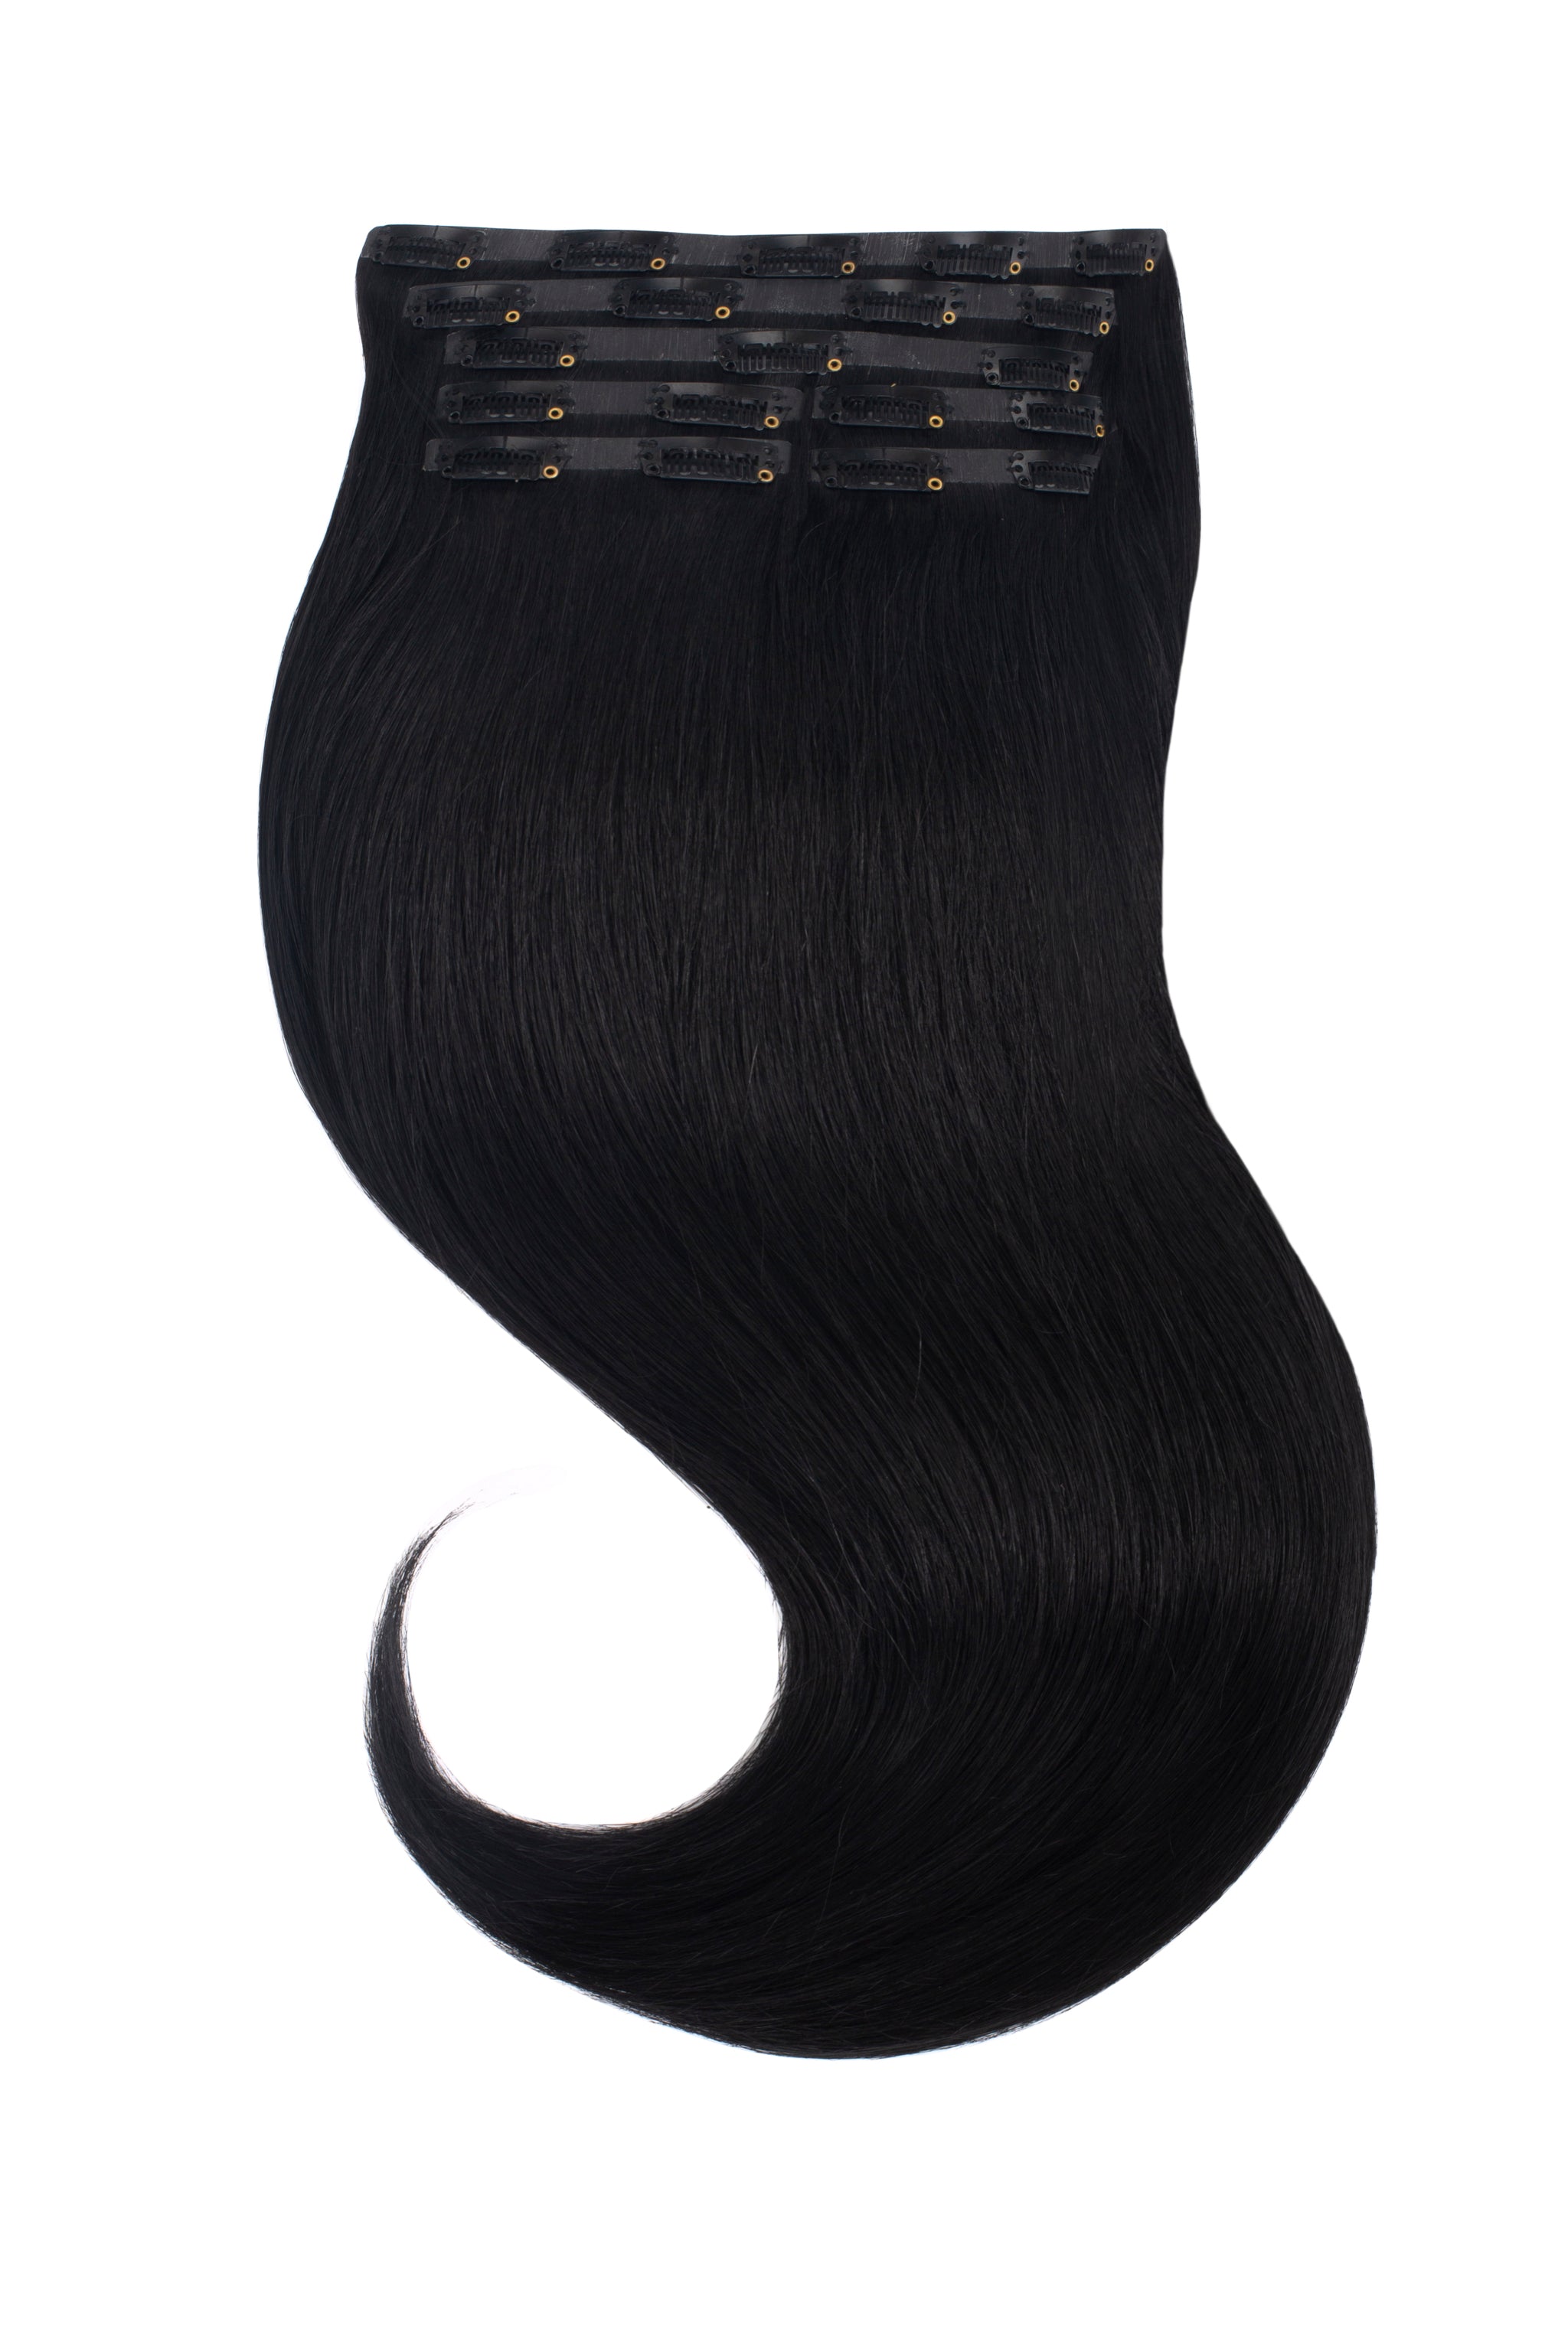 Jet Black Clip In Hair Extensions | Glam Seamless - Glam Seamless Hair  Extensions